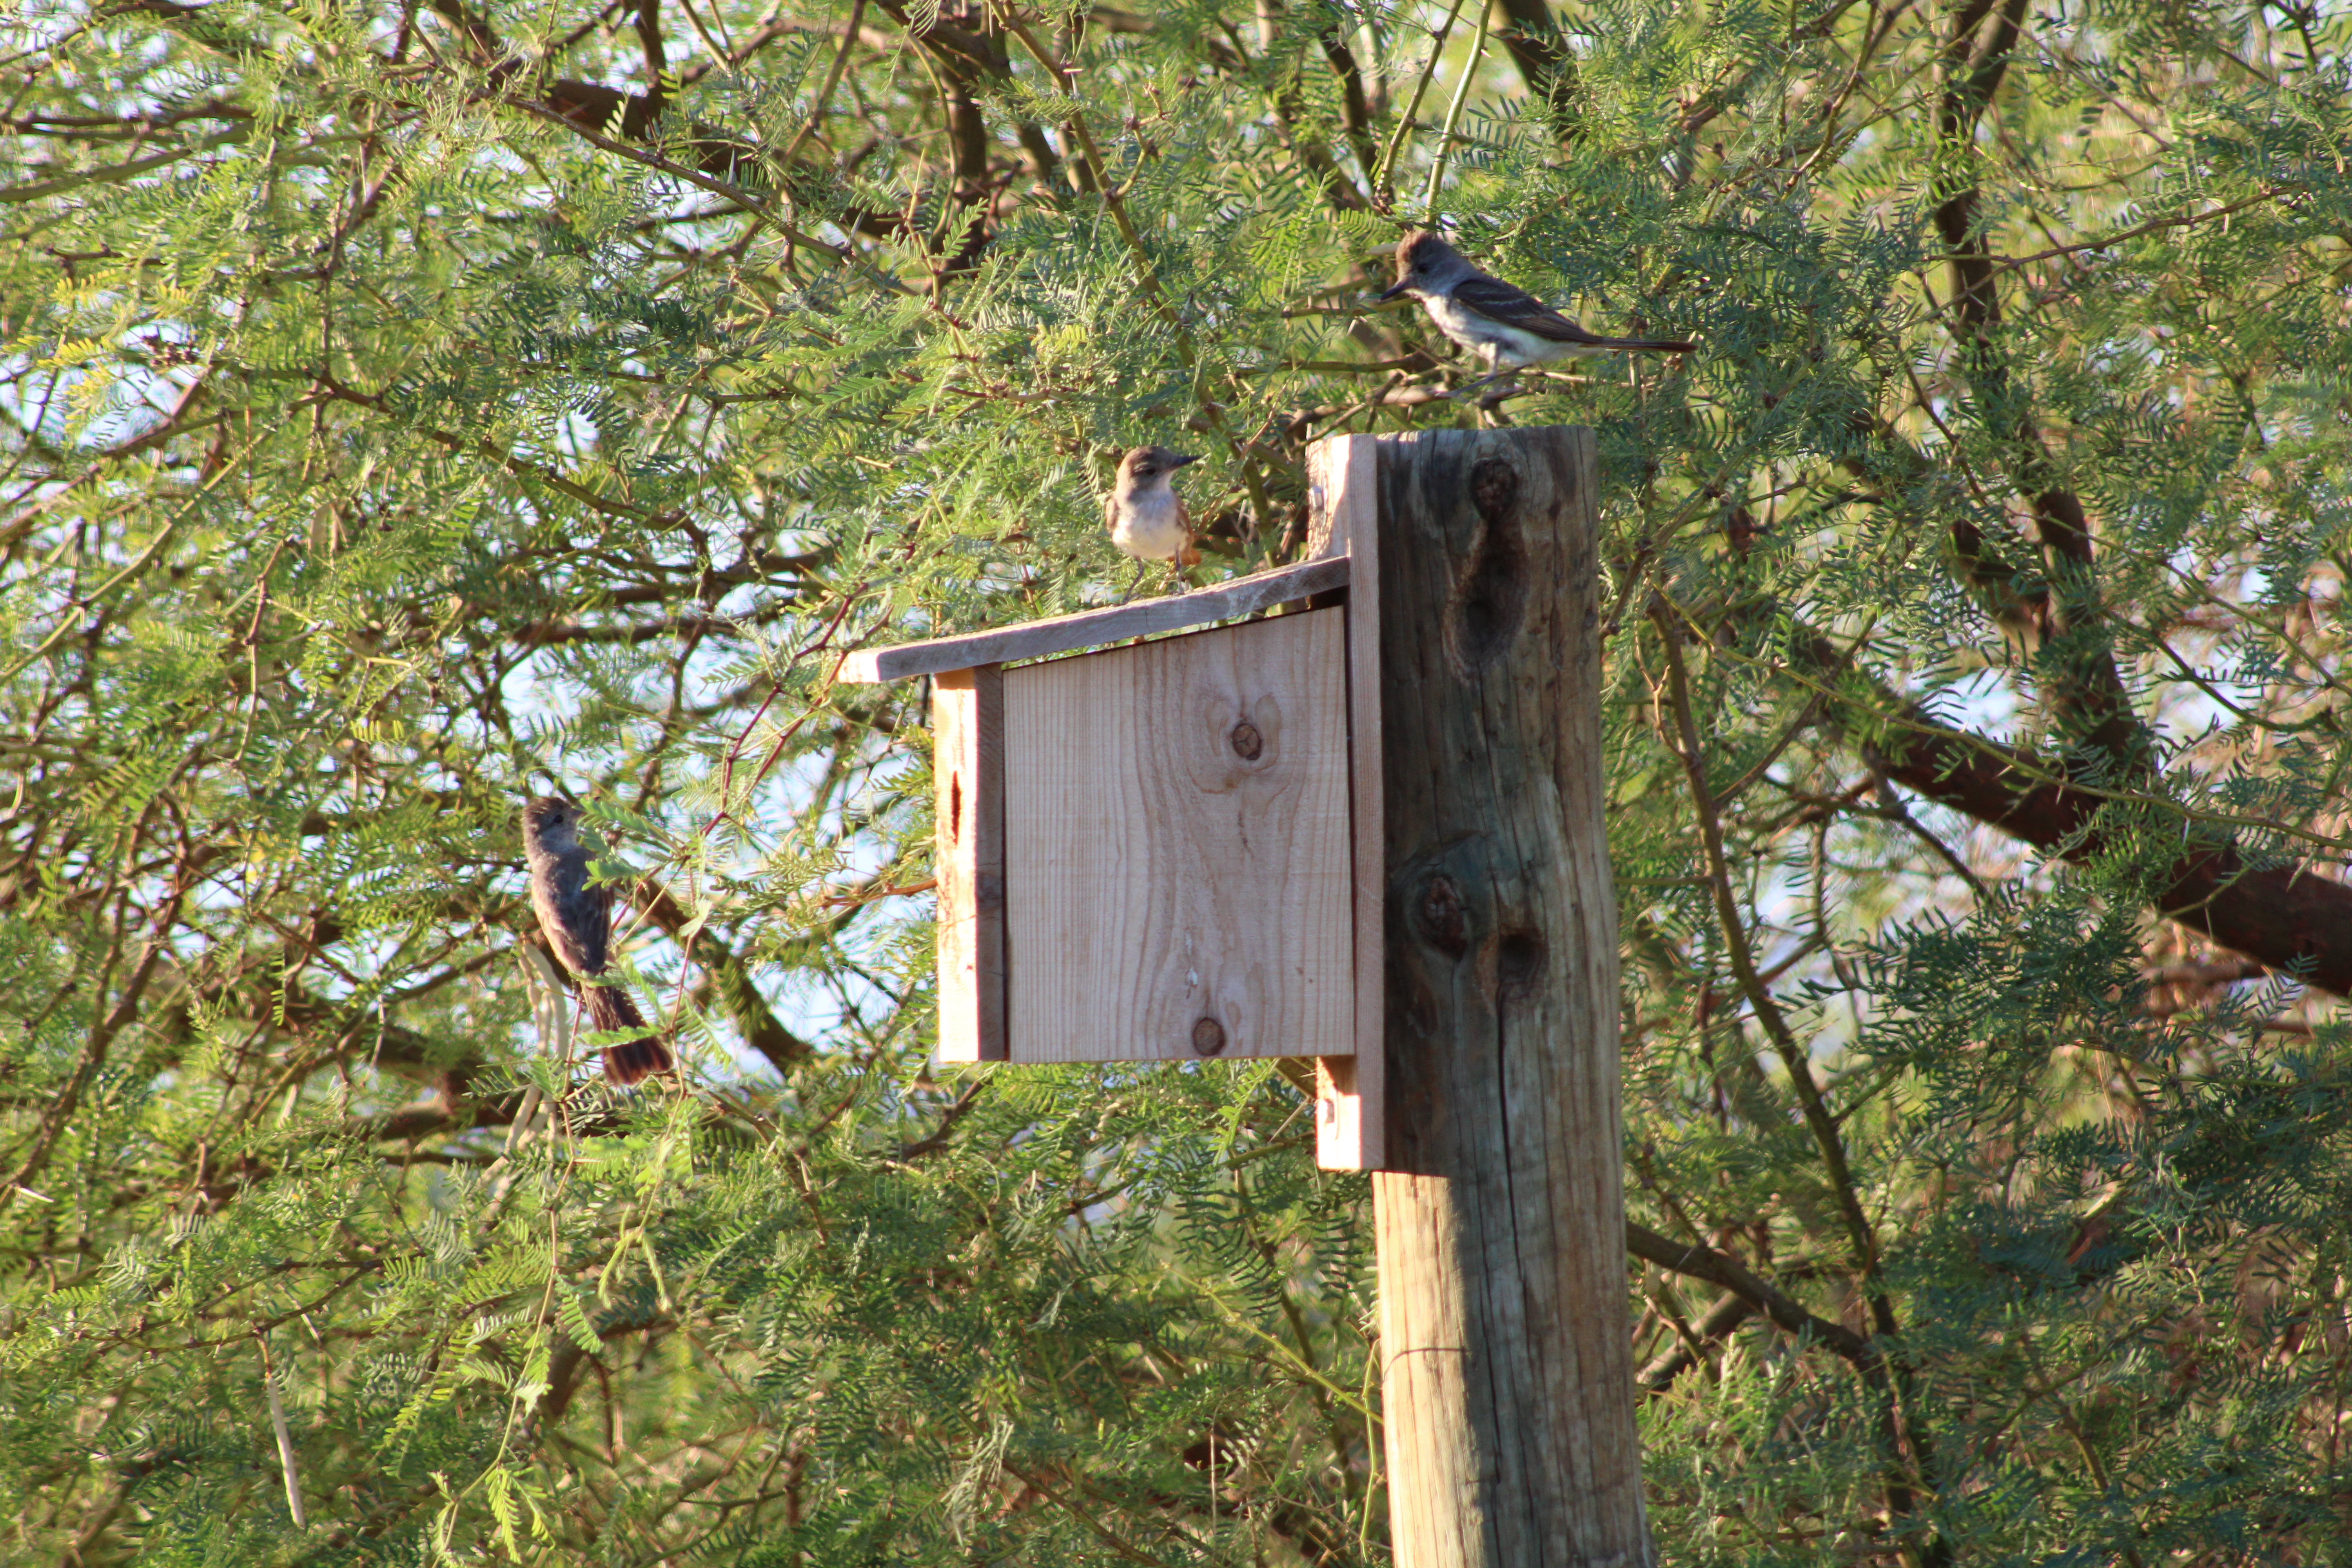 Ash-throated Flycatchers' and nesting box